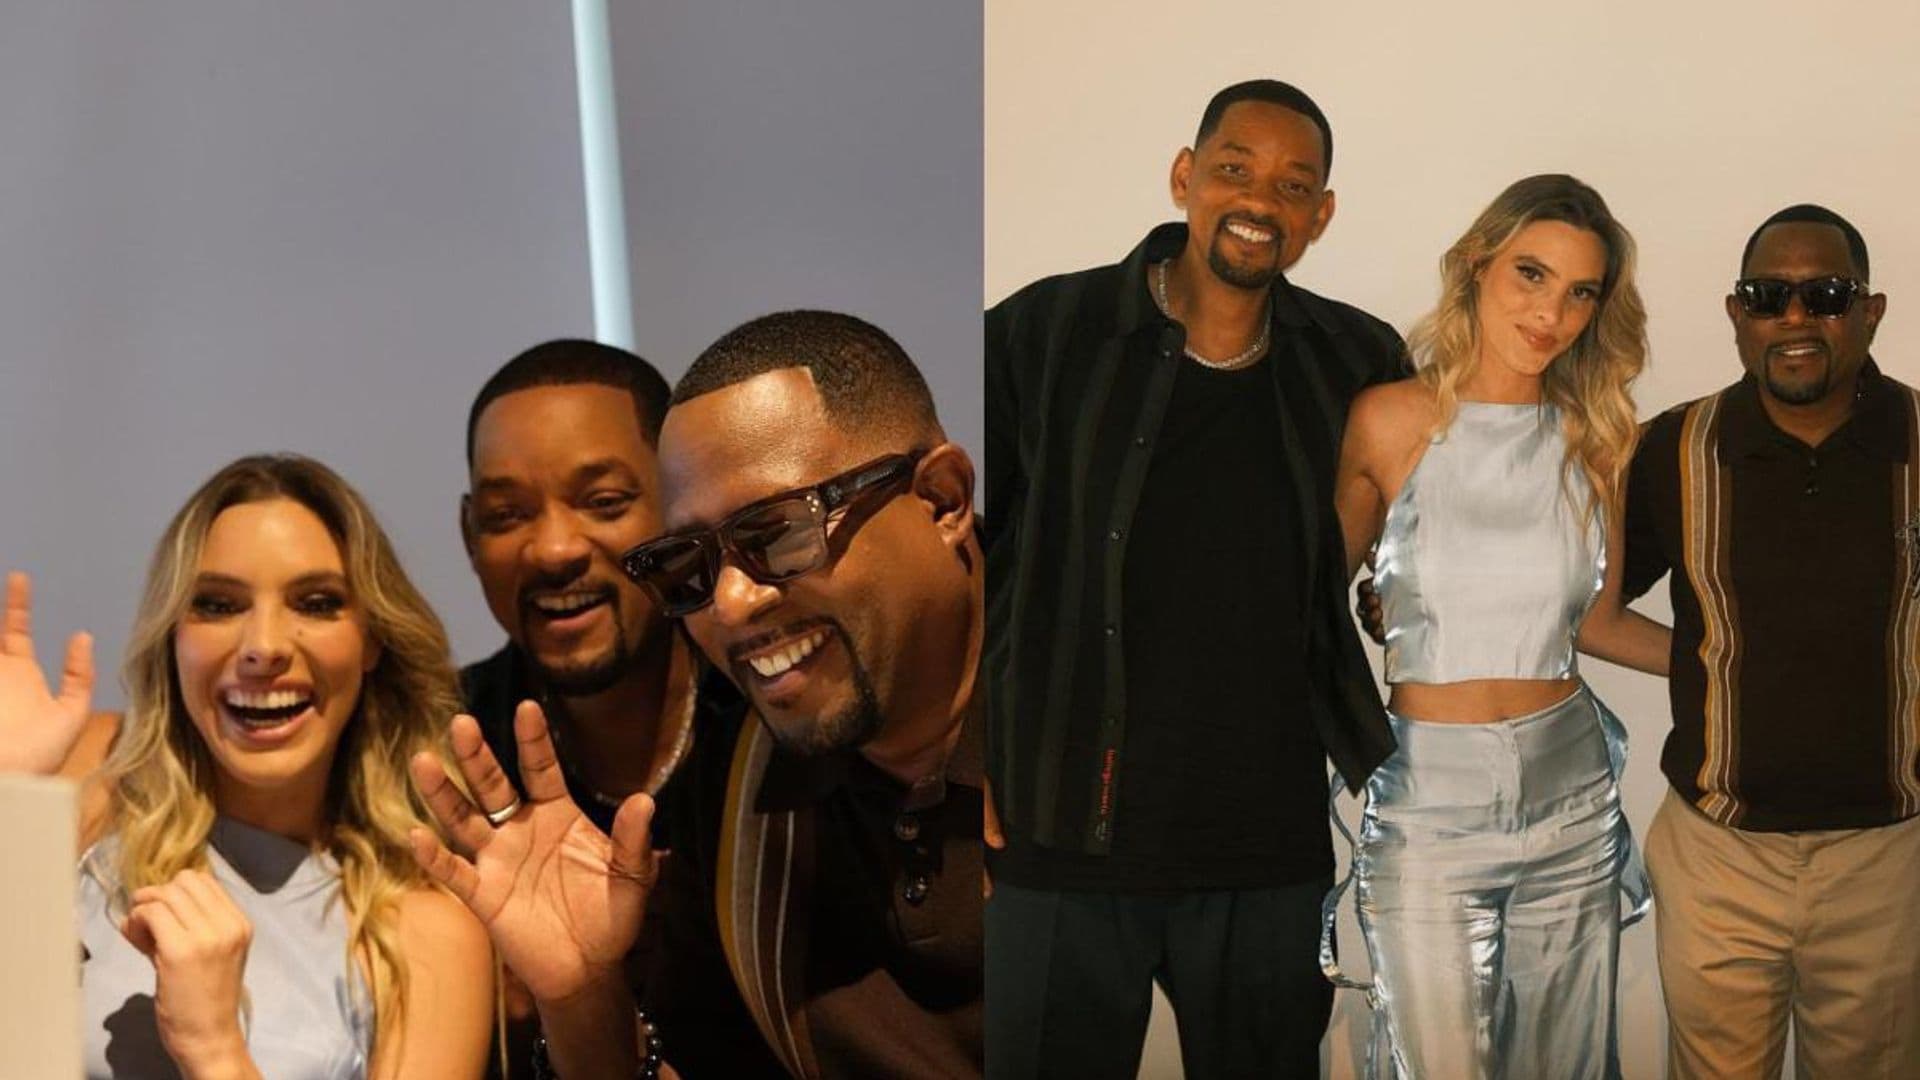 Will Smith confesses to Lele Pons how she inspired him: Watch the epic video